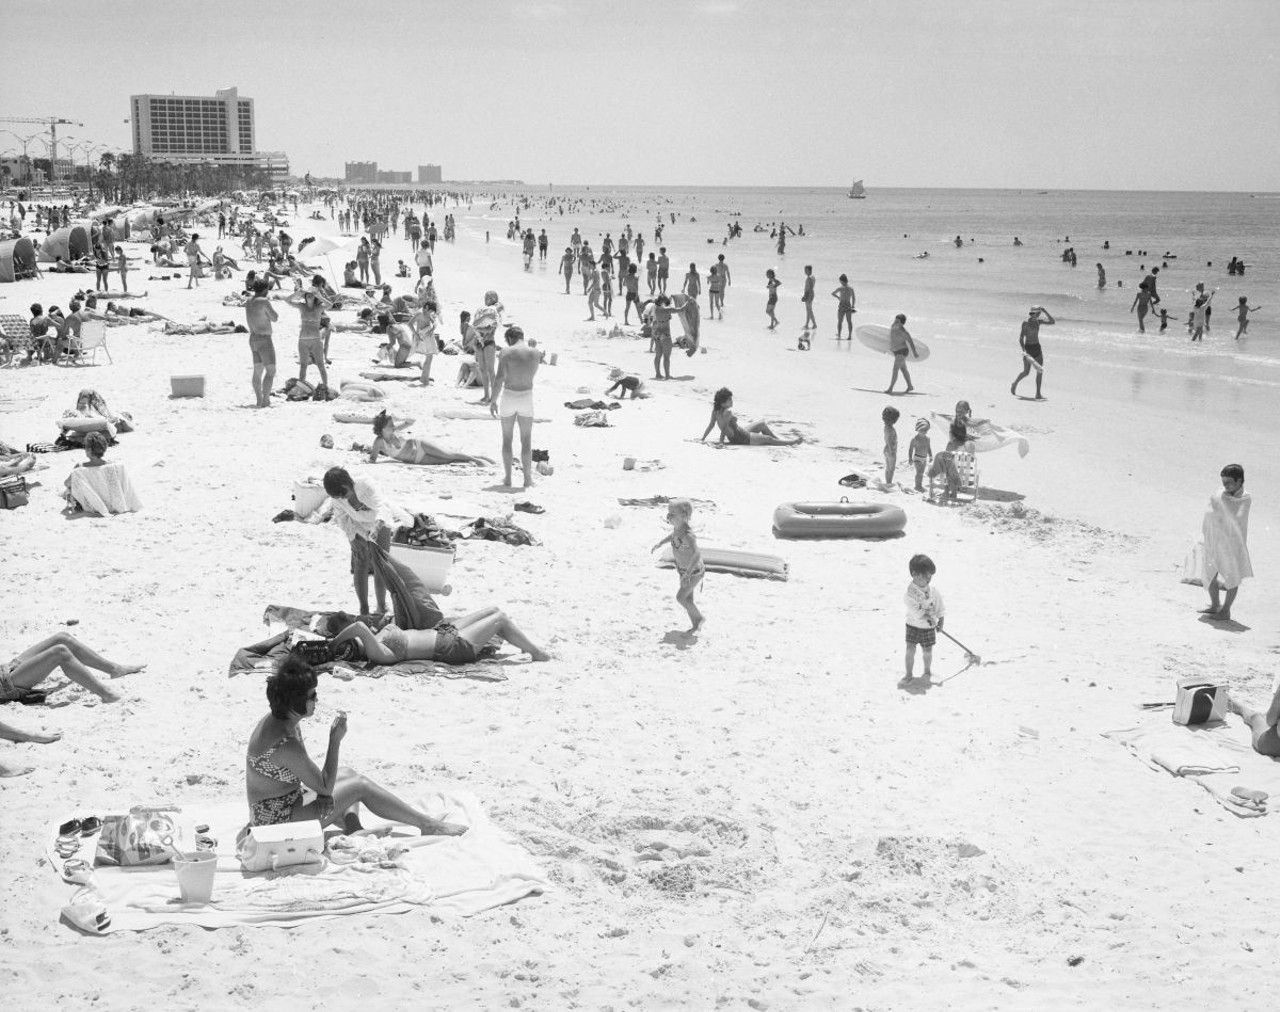 These vintage photos show how much Clearwater has changed in the last